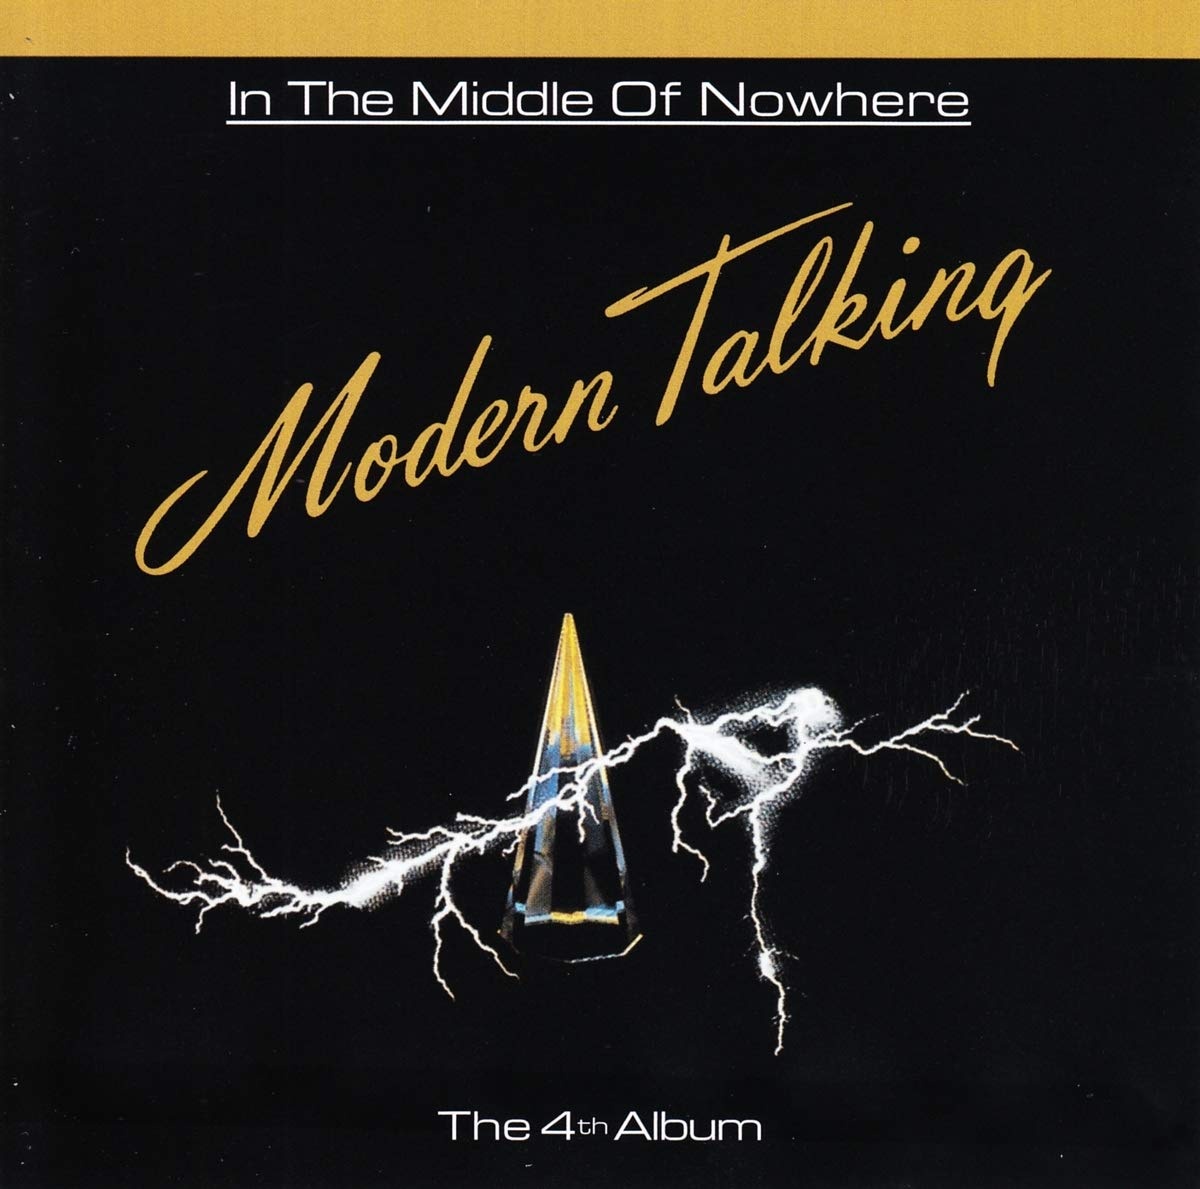 MODERN TALKING - In The Middle Of Nowhere CD 2019 - купить CD-диск в ...